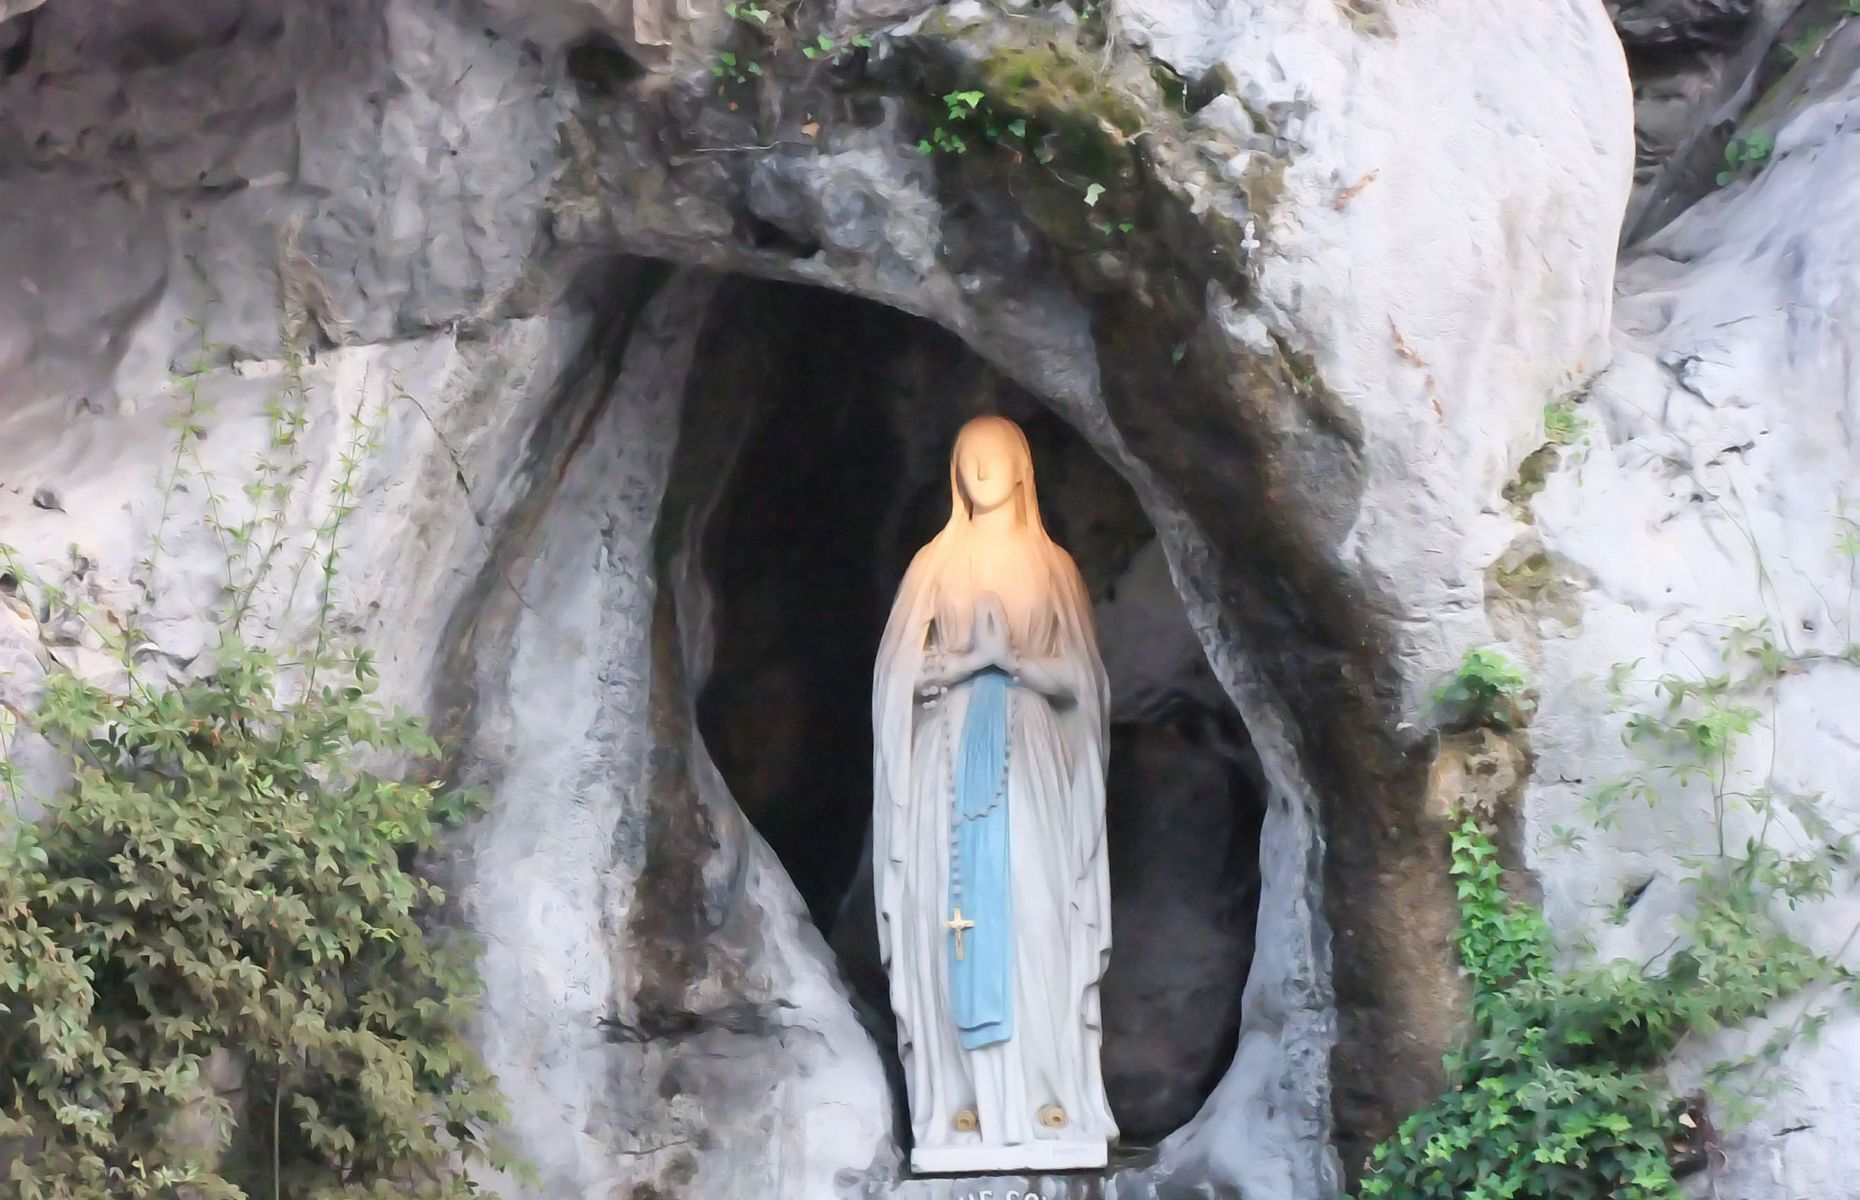 <p><a href="https://us.france.fr/en/occitanie-south-of-france/article/lourdes-0" rel="noreferrer noopener">Several million people</a> make the pilgrimage to Lourdes every year to visit the Massabielle cave, where the <a href="https://www.lourdes-france.org/en/apparitions/" rel="noreferrer noopener">Virgin appeared to Bernadette Soubirous in 1858</a>. In fact, many pilgrims are sick and come for a miraculous cure from the site’s fountains and pools of water. The sanctuary houses three basilicas as well as a modern church dedicated to Saint Bernadette.</p>